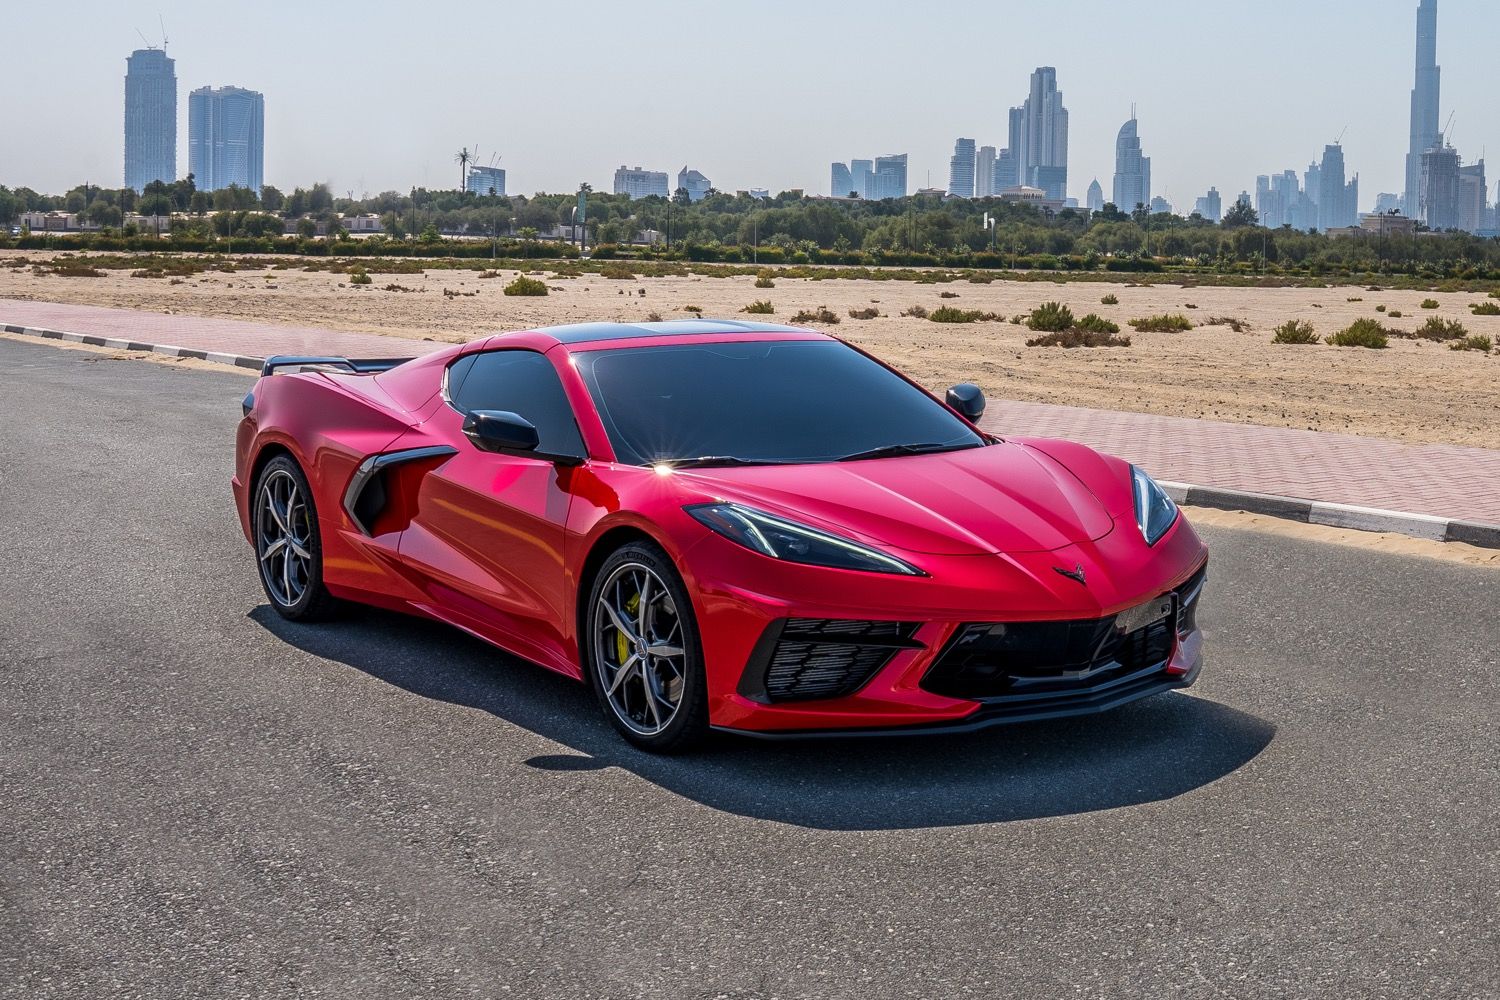 The 2020 C8 Corvette Arrives in the Middle East This Month